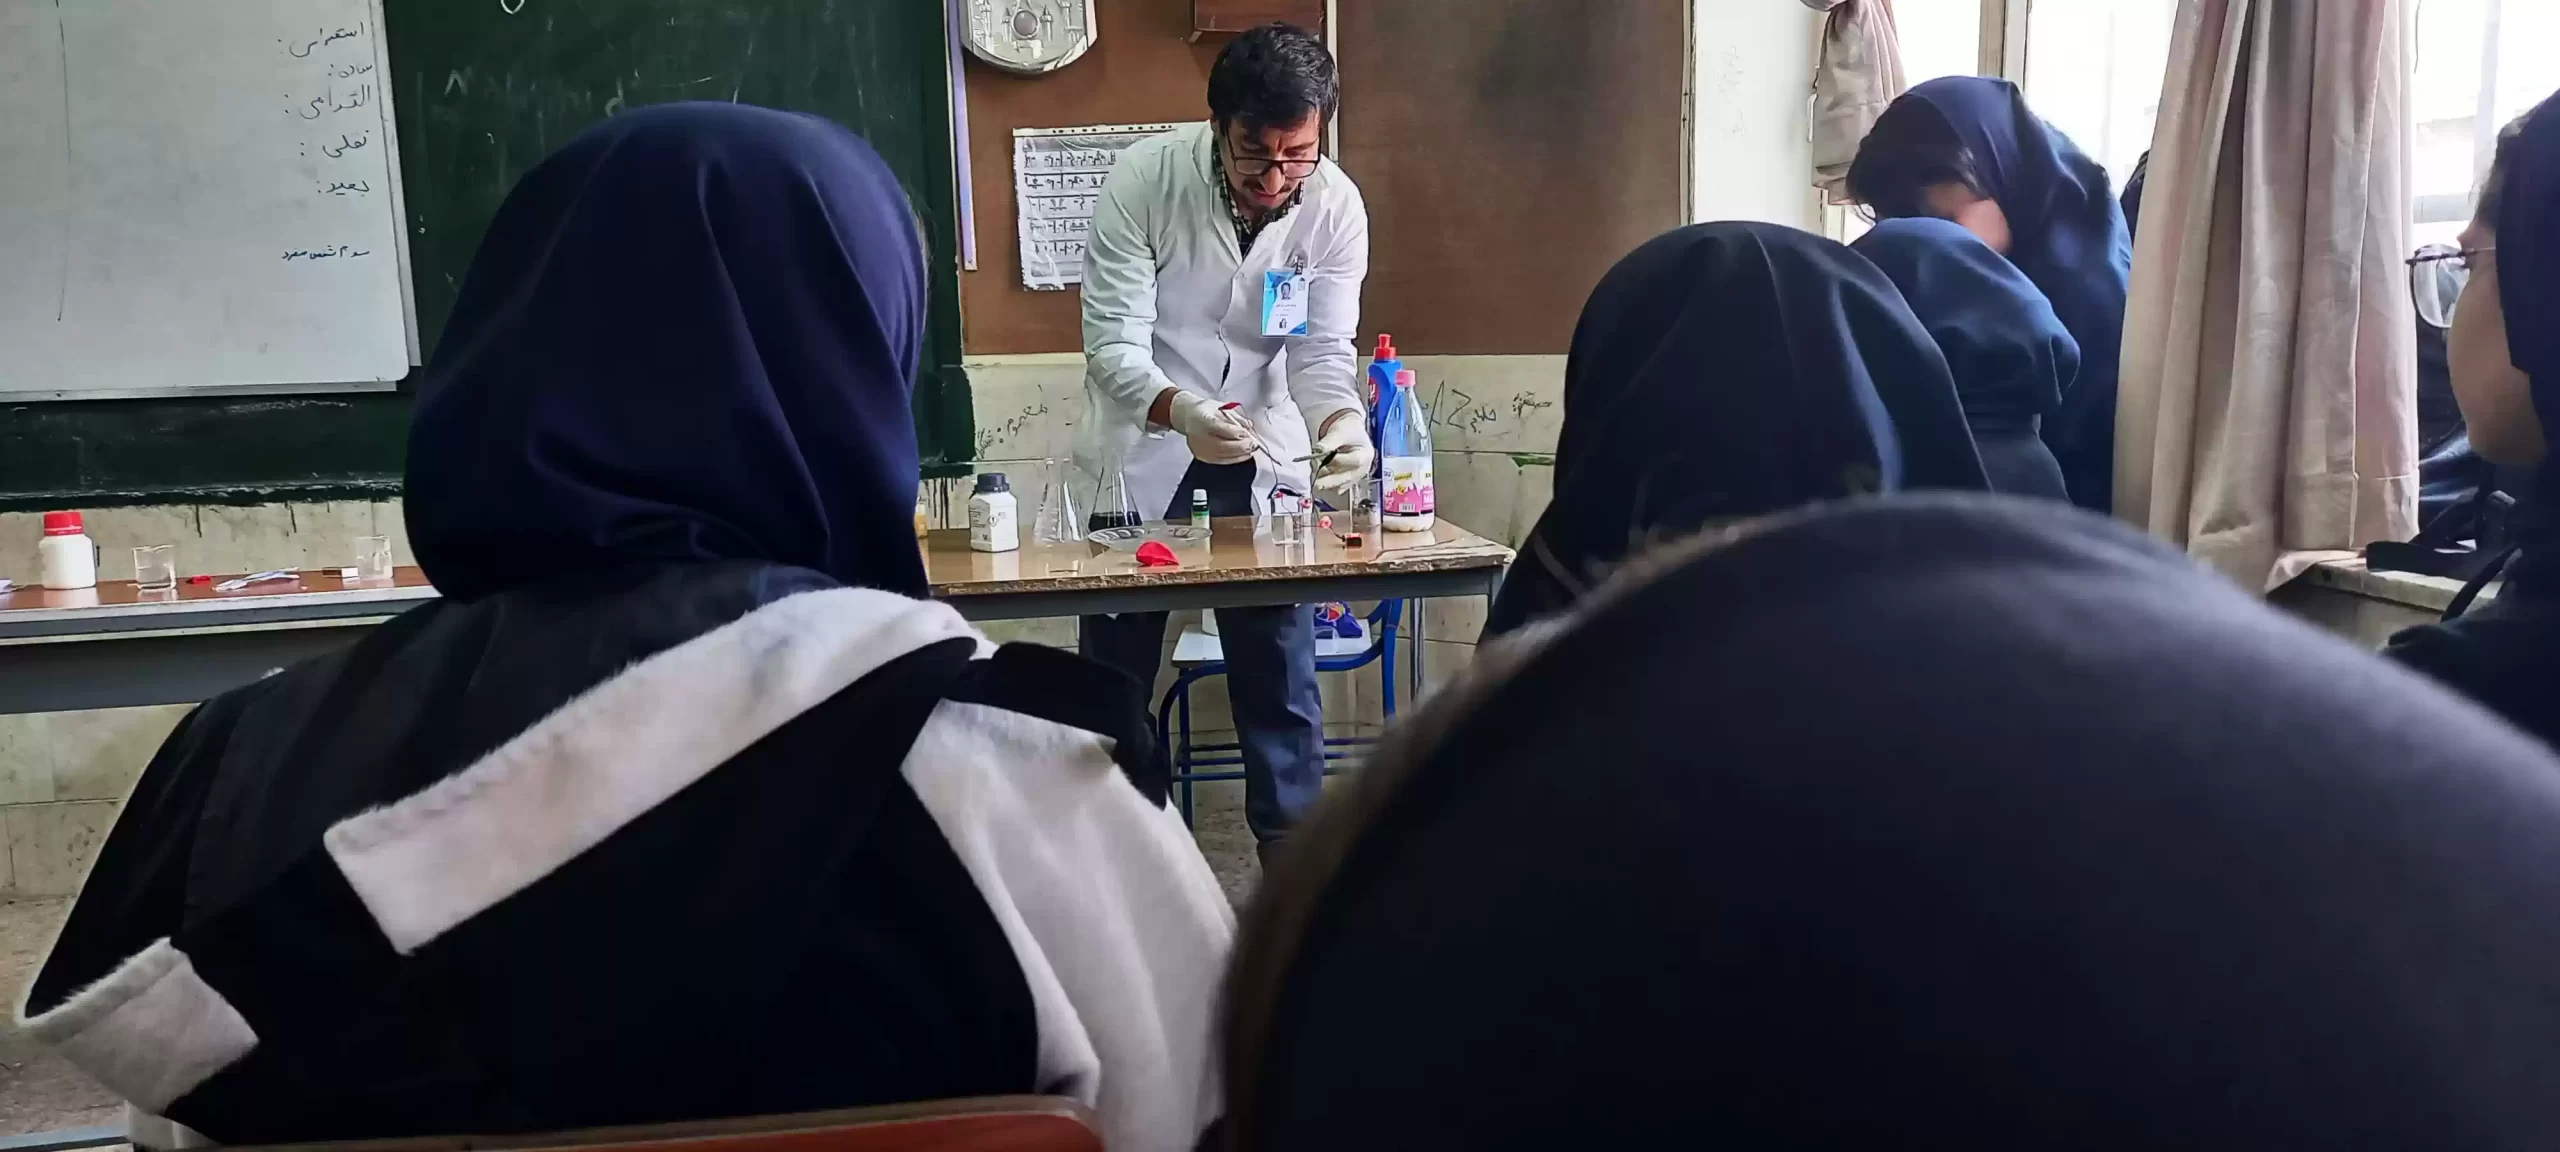 Students benefiting from IASBS Science Ambassadors project exceed 3,000